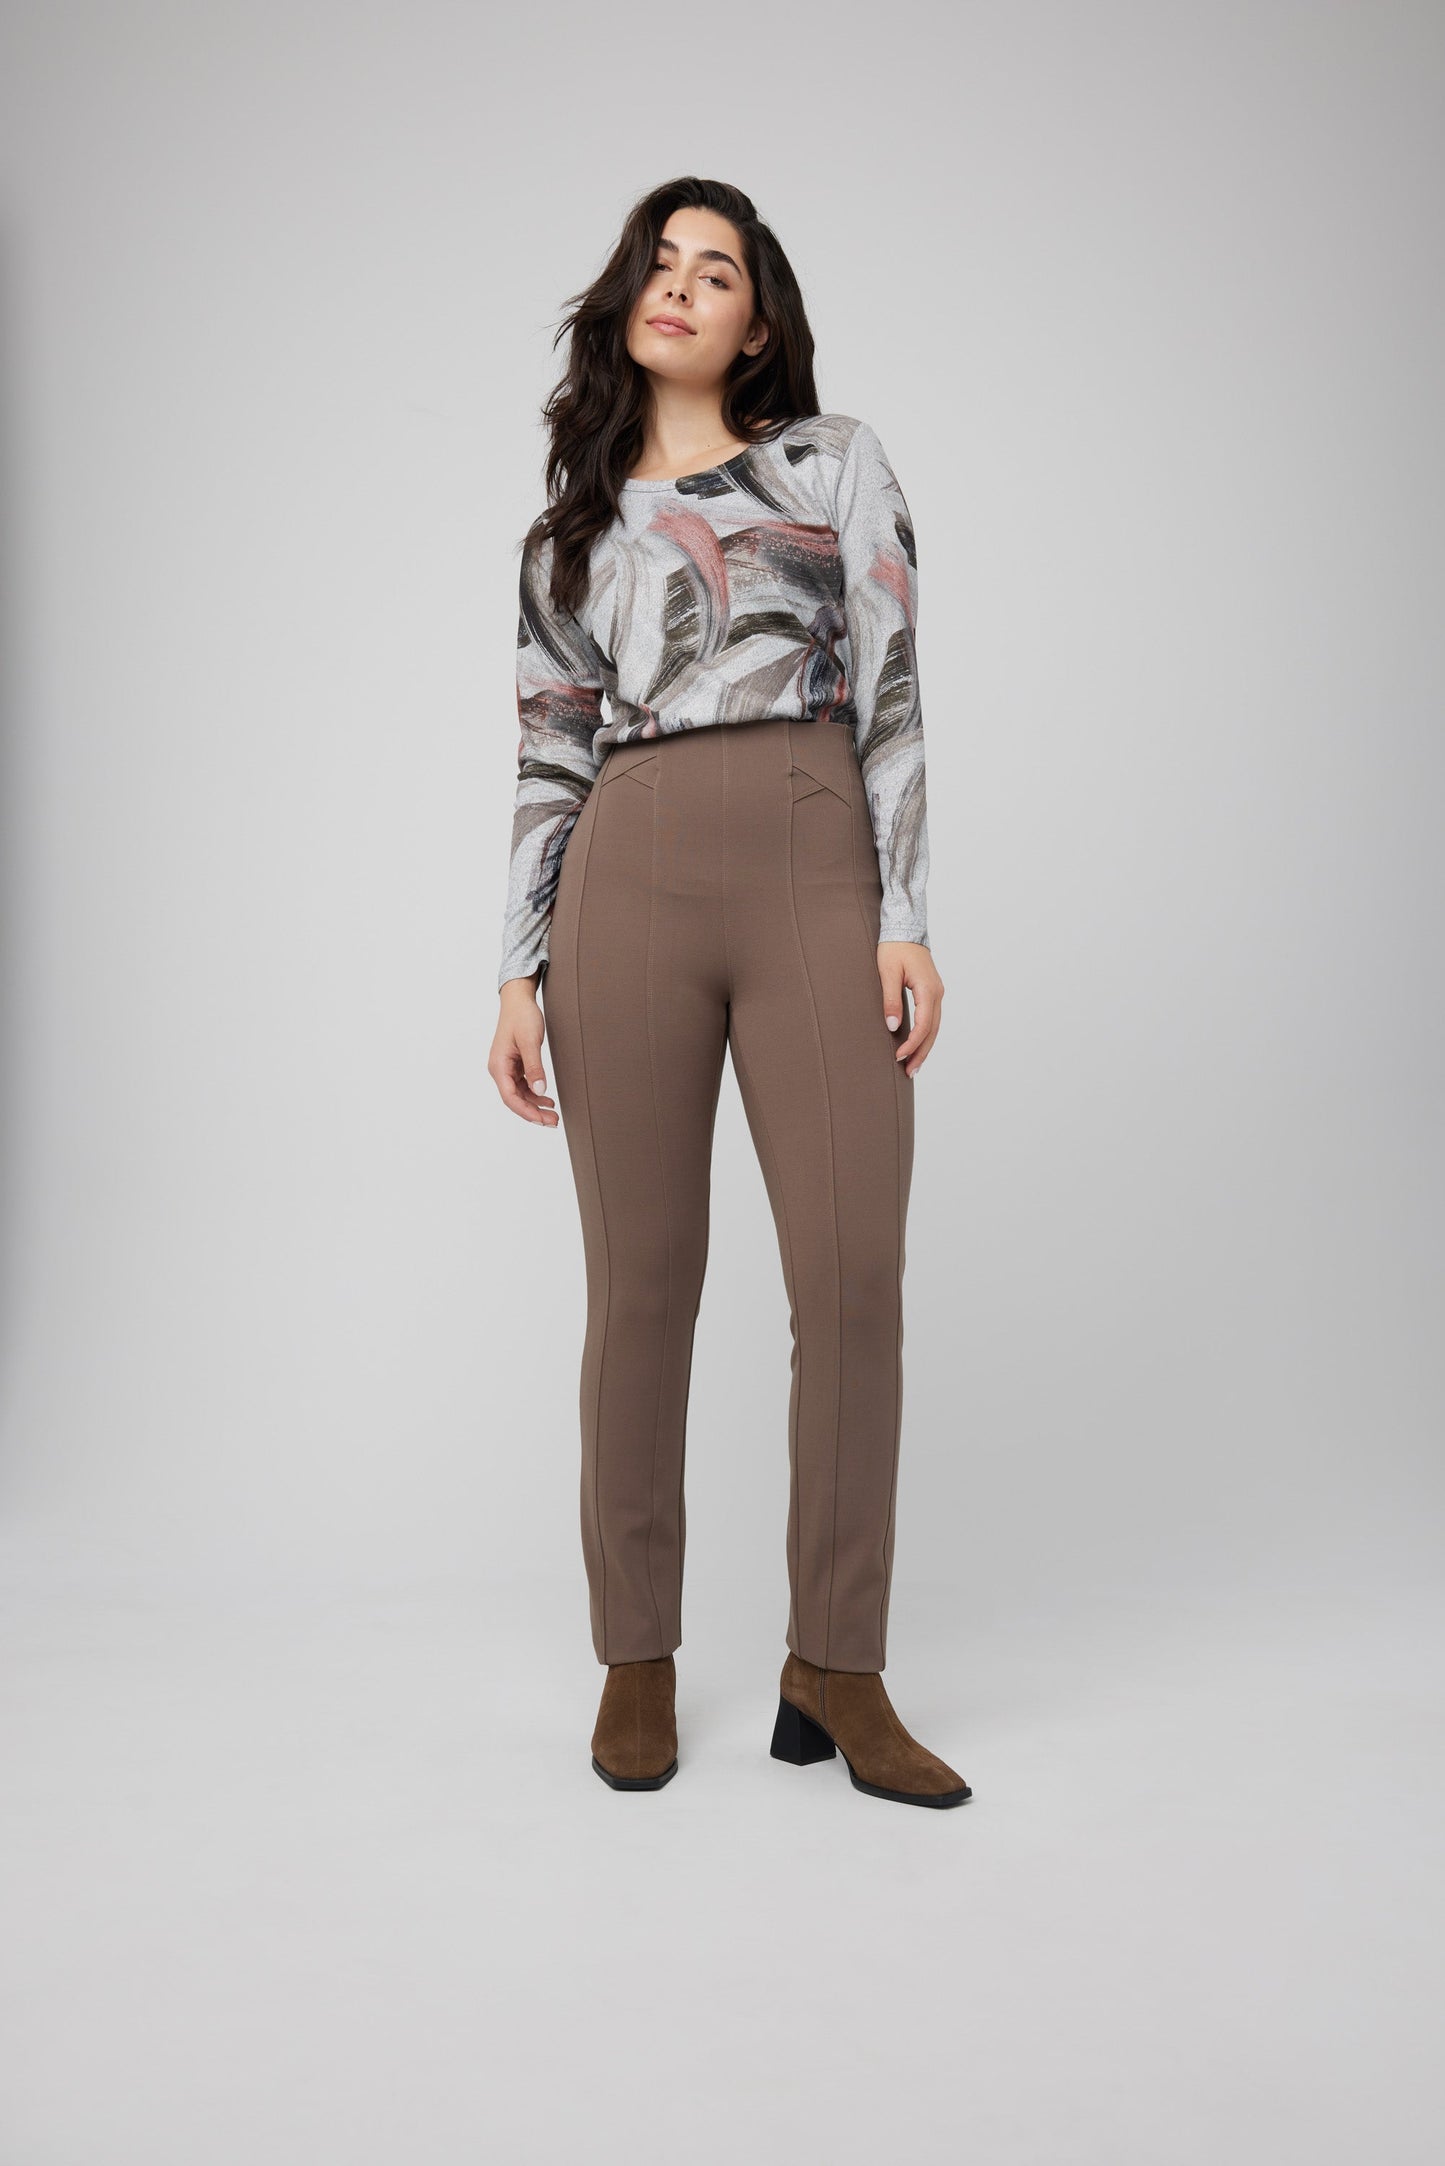 The model is wearing a slimming fit beige sweater and Coco Y Club's Front Seam Slim Pull On Pant in brown, perfect for everyday wear.